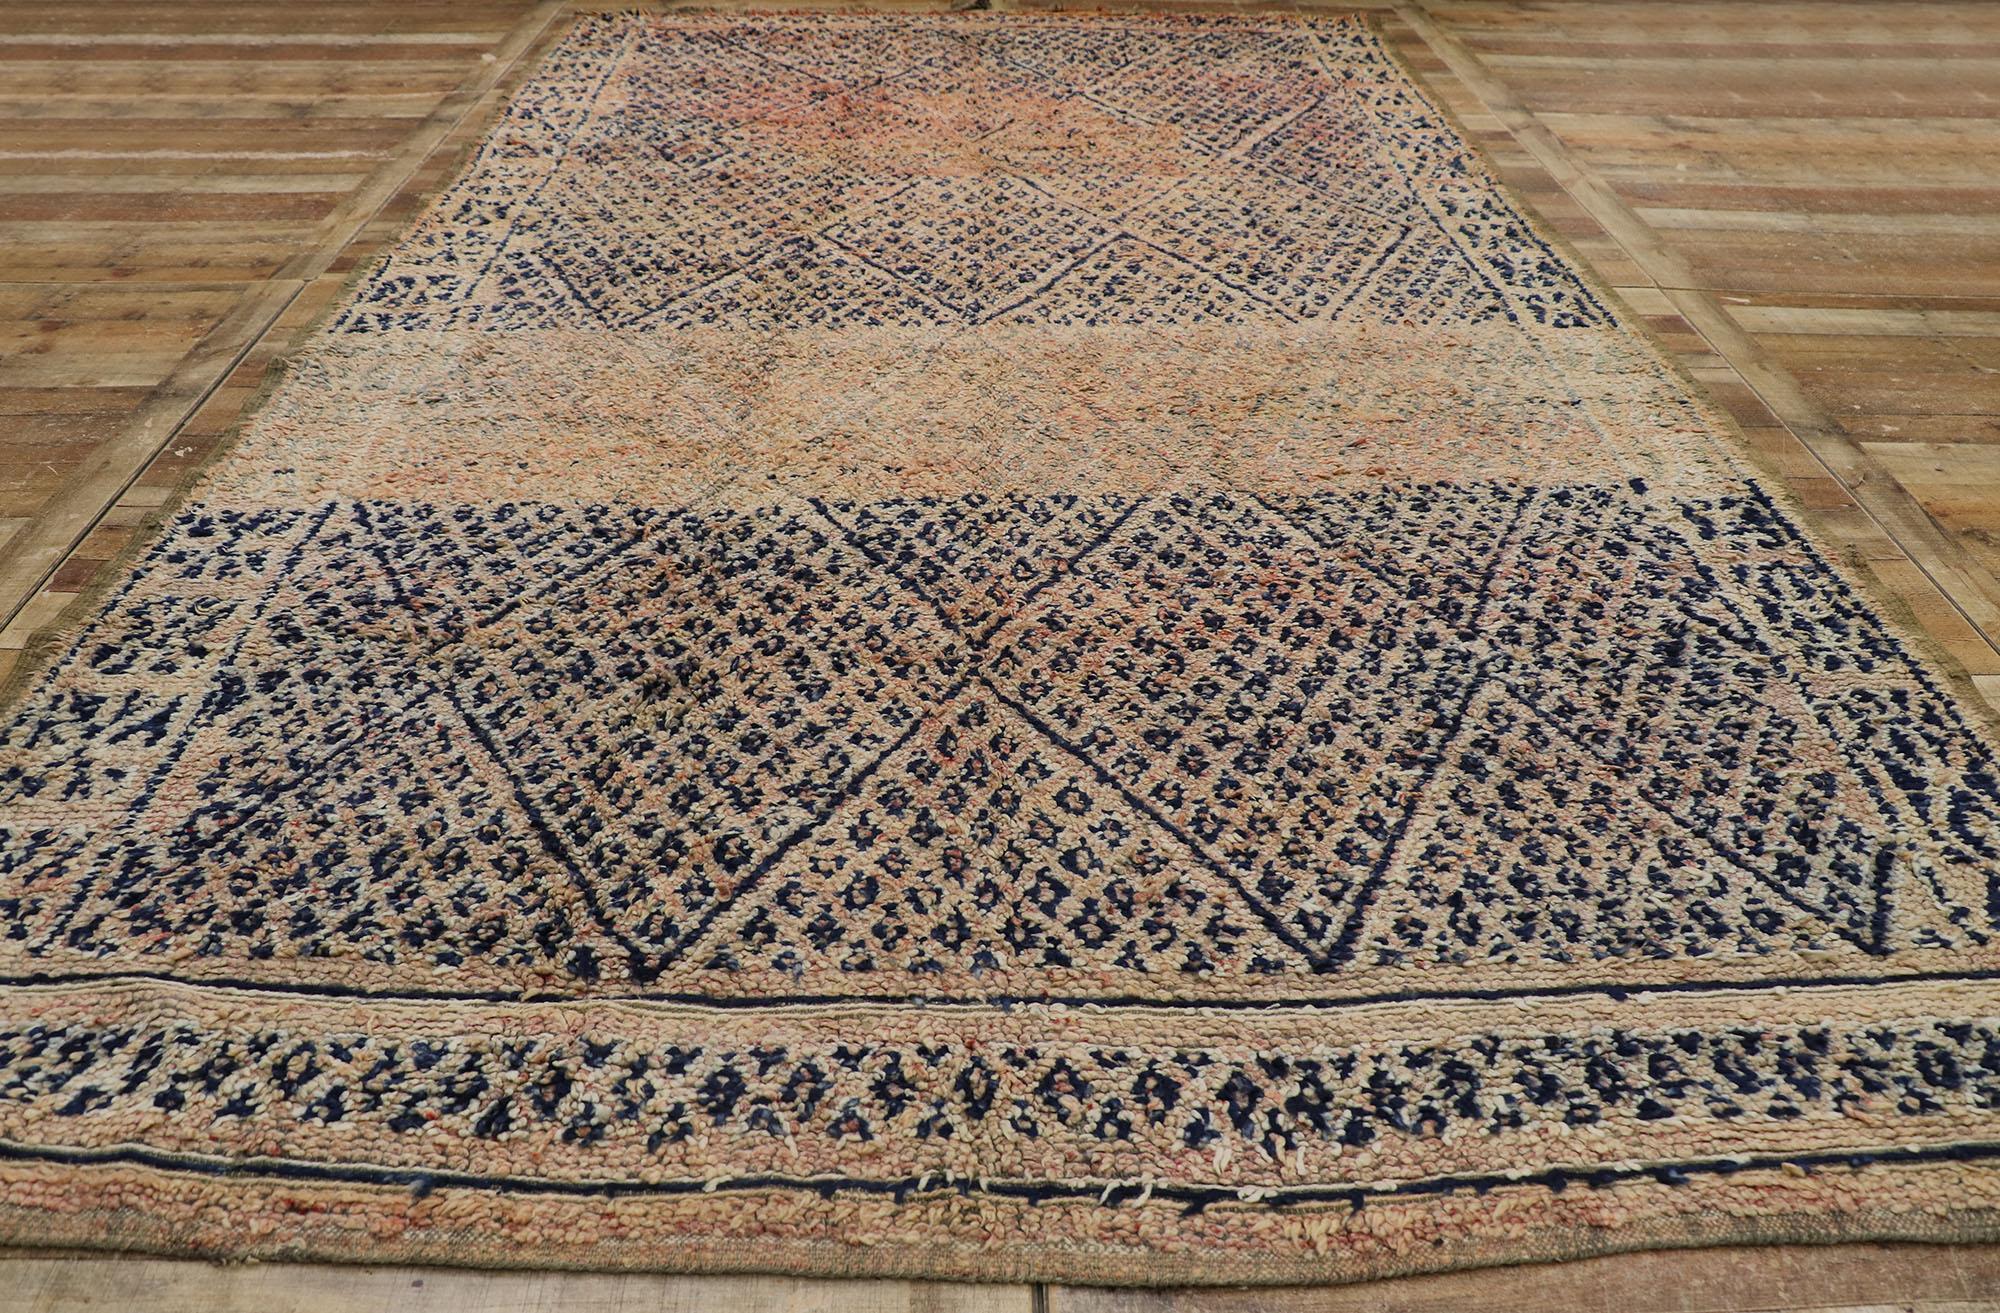 Vintage Berber Zayane Moroccan Rug with Bohemian Style 1